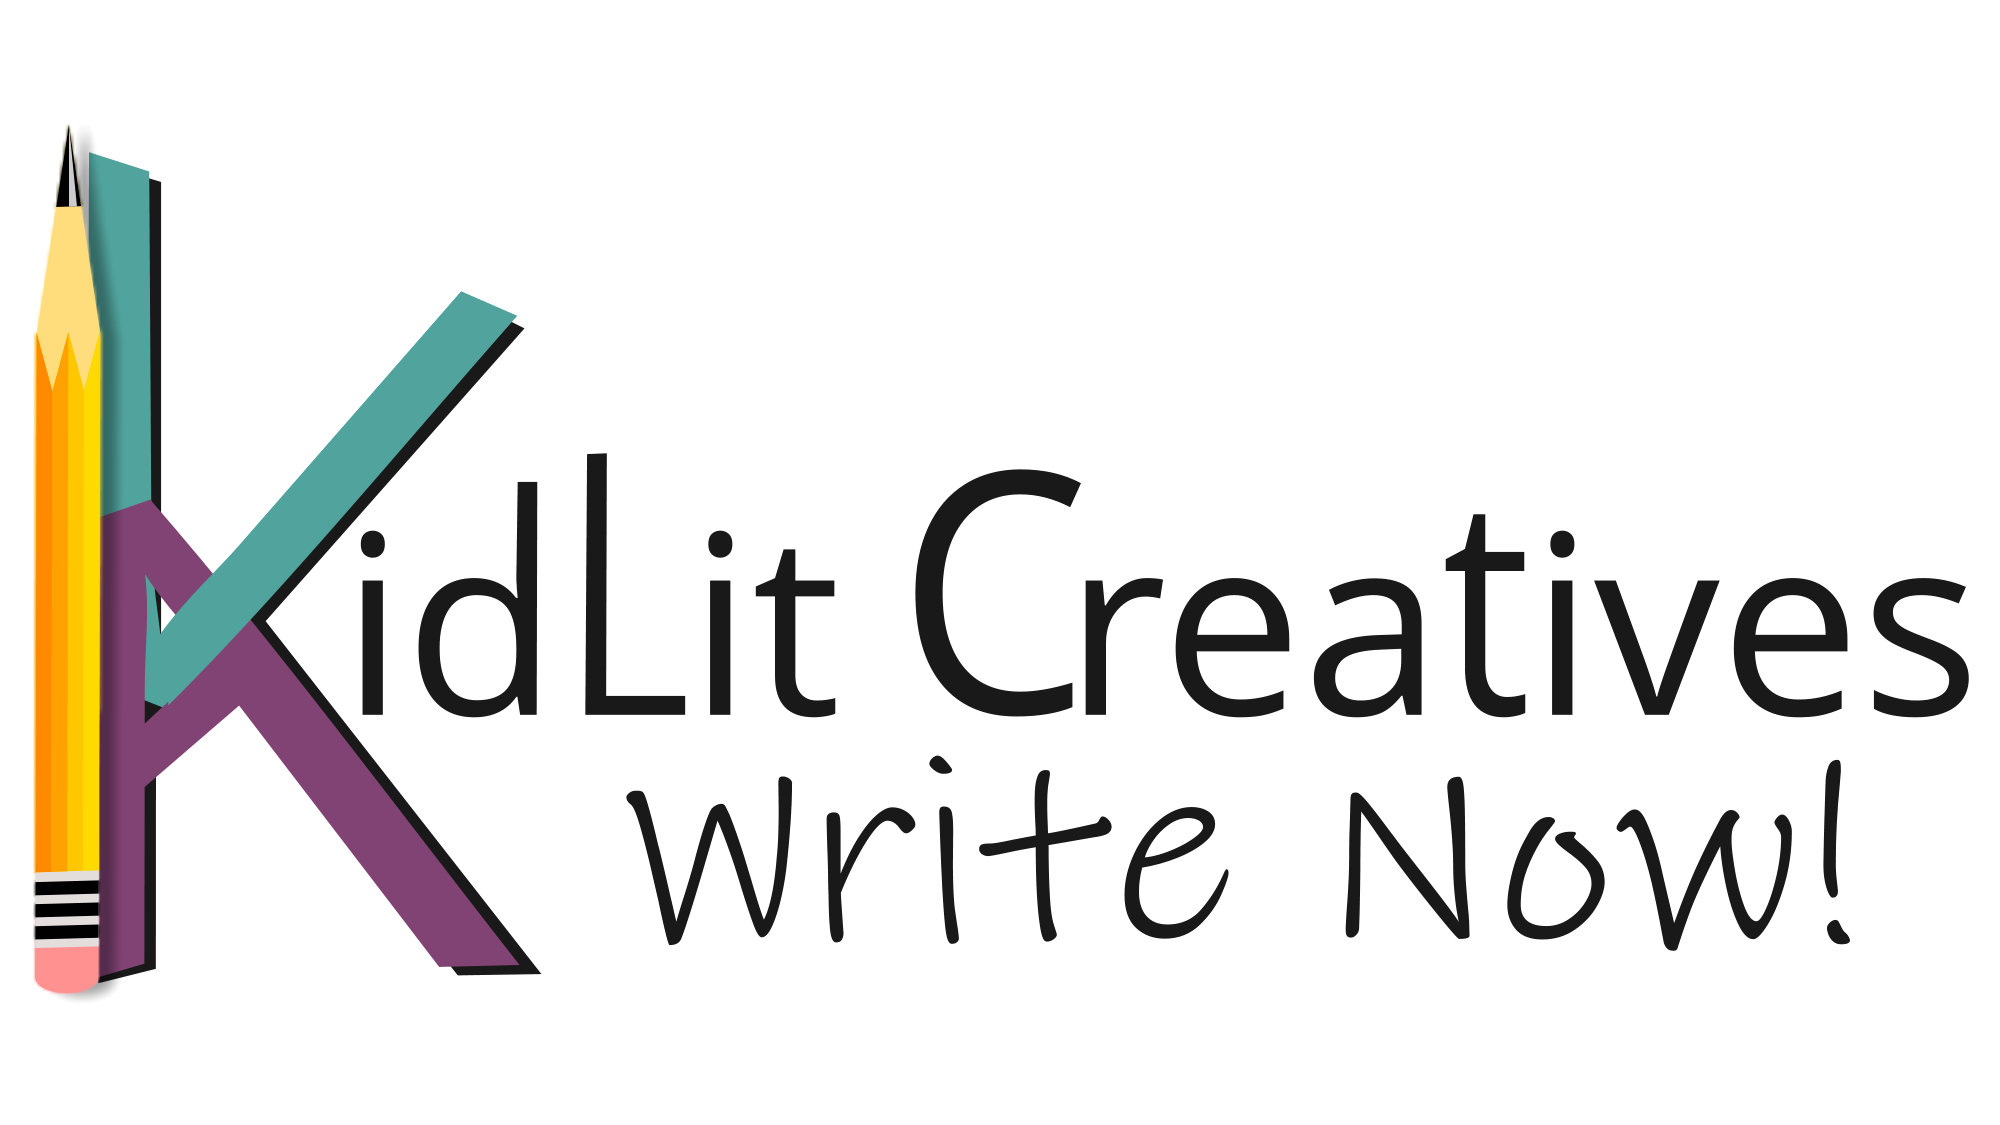 text: KidLit Creatives Write Now! on a white background, where the K in KidLit is made up of a green V stacked on top of a purple A, with a sharpened pencil for the upright of the letter